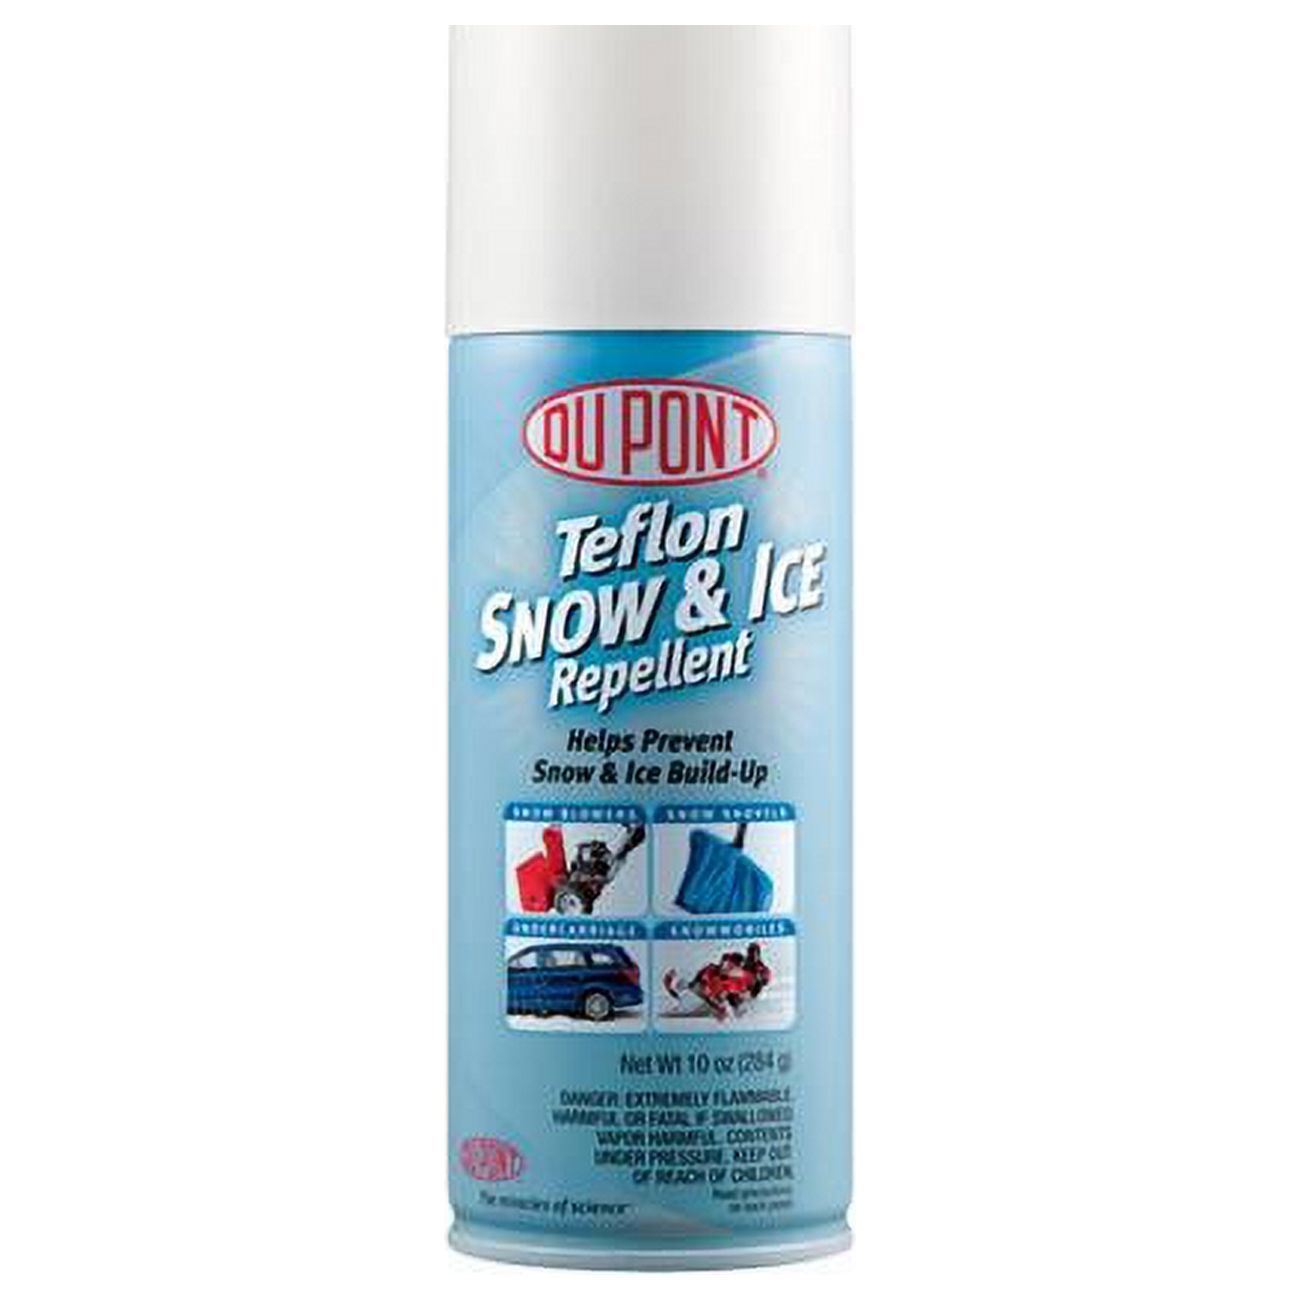 DuPont Sprayer Snow and Ice Repellent 10 oz 1 pk - image 1 of 5